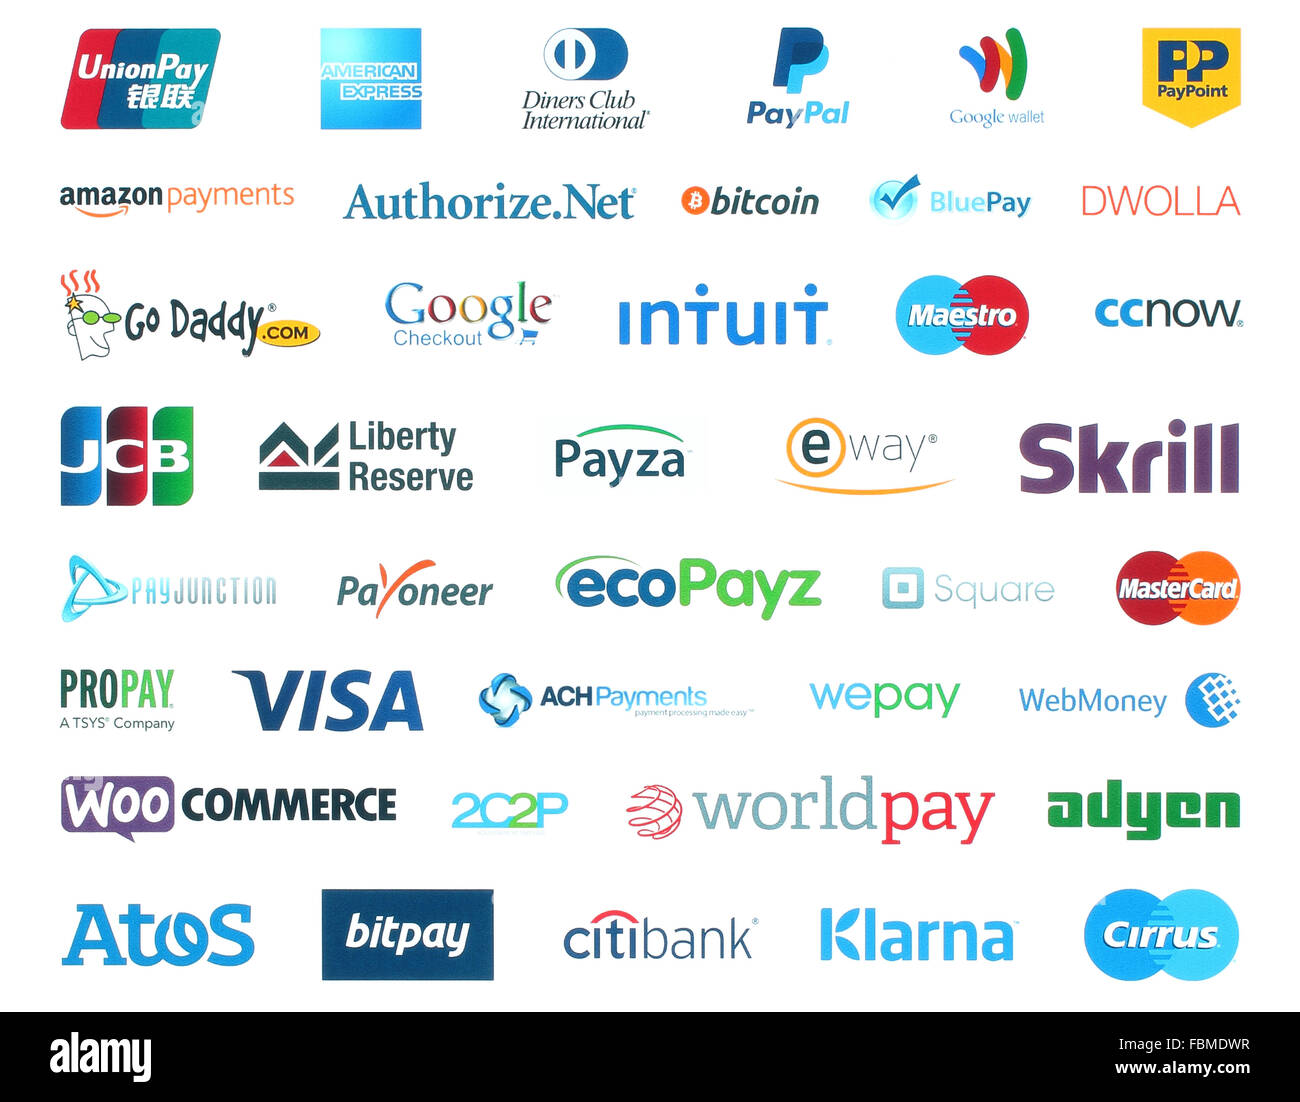 Kiev, Ukraine - January 11, 2016: Collection of popular payment system logos printed on white paper:PayPal, Google Wallet, Bitco Stock Photo